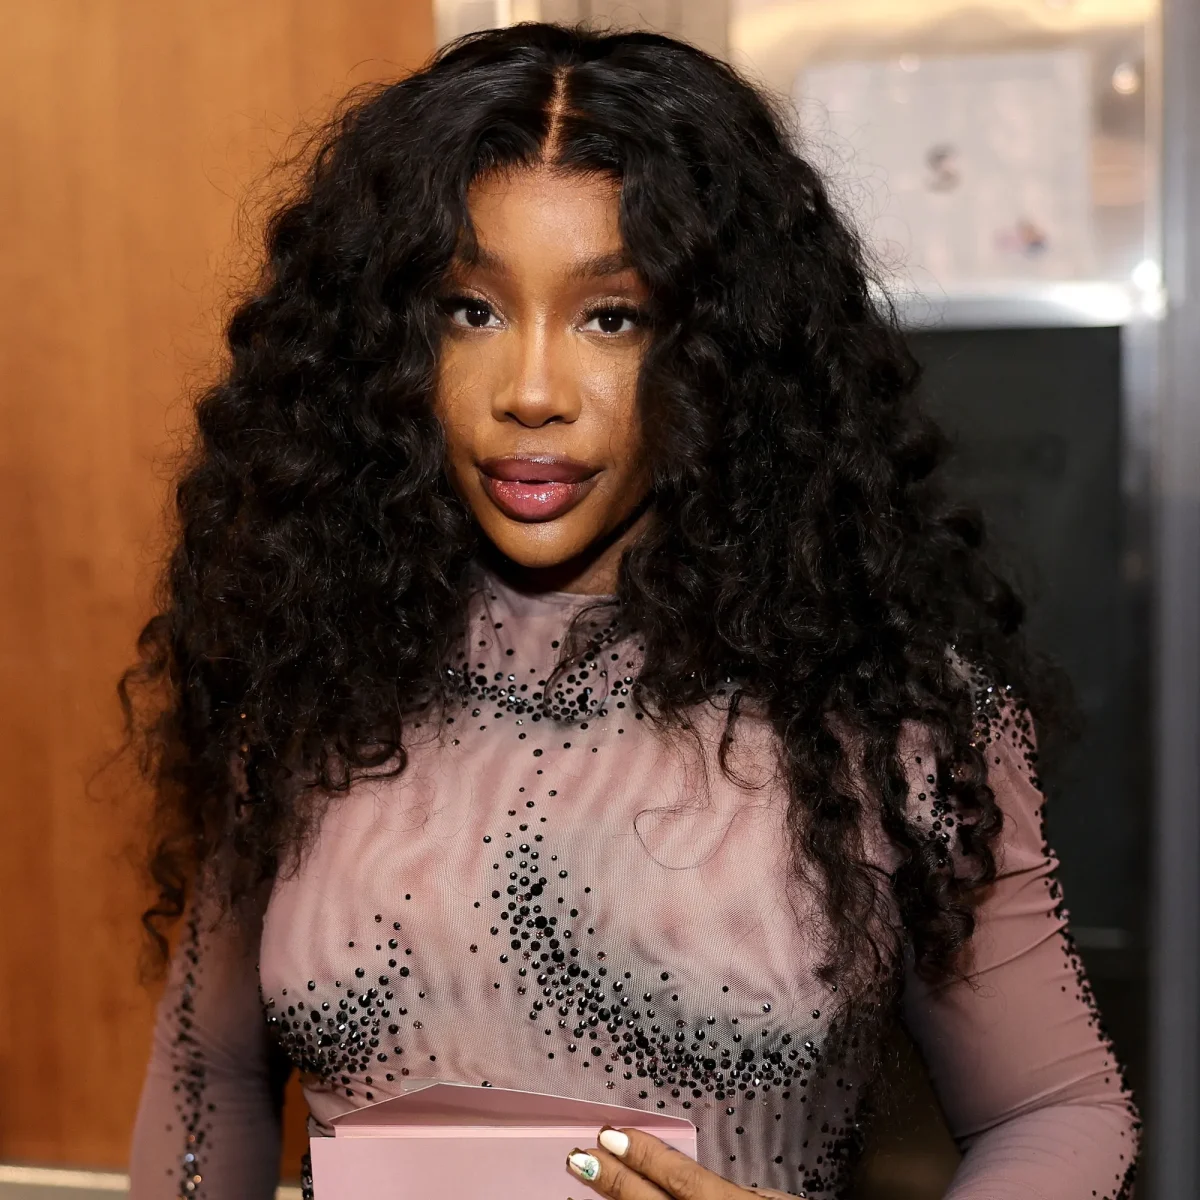 Sza Reacts To Fans' Unruly Behavior At Her Aussie Concert 3